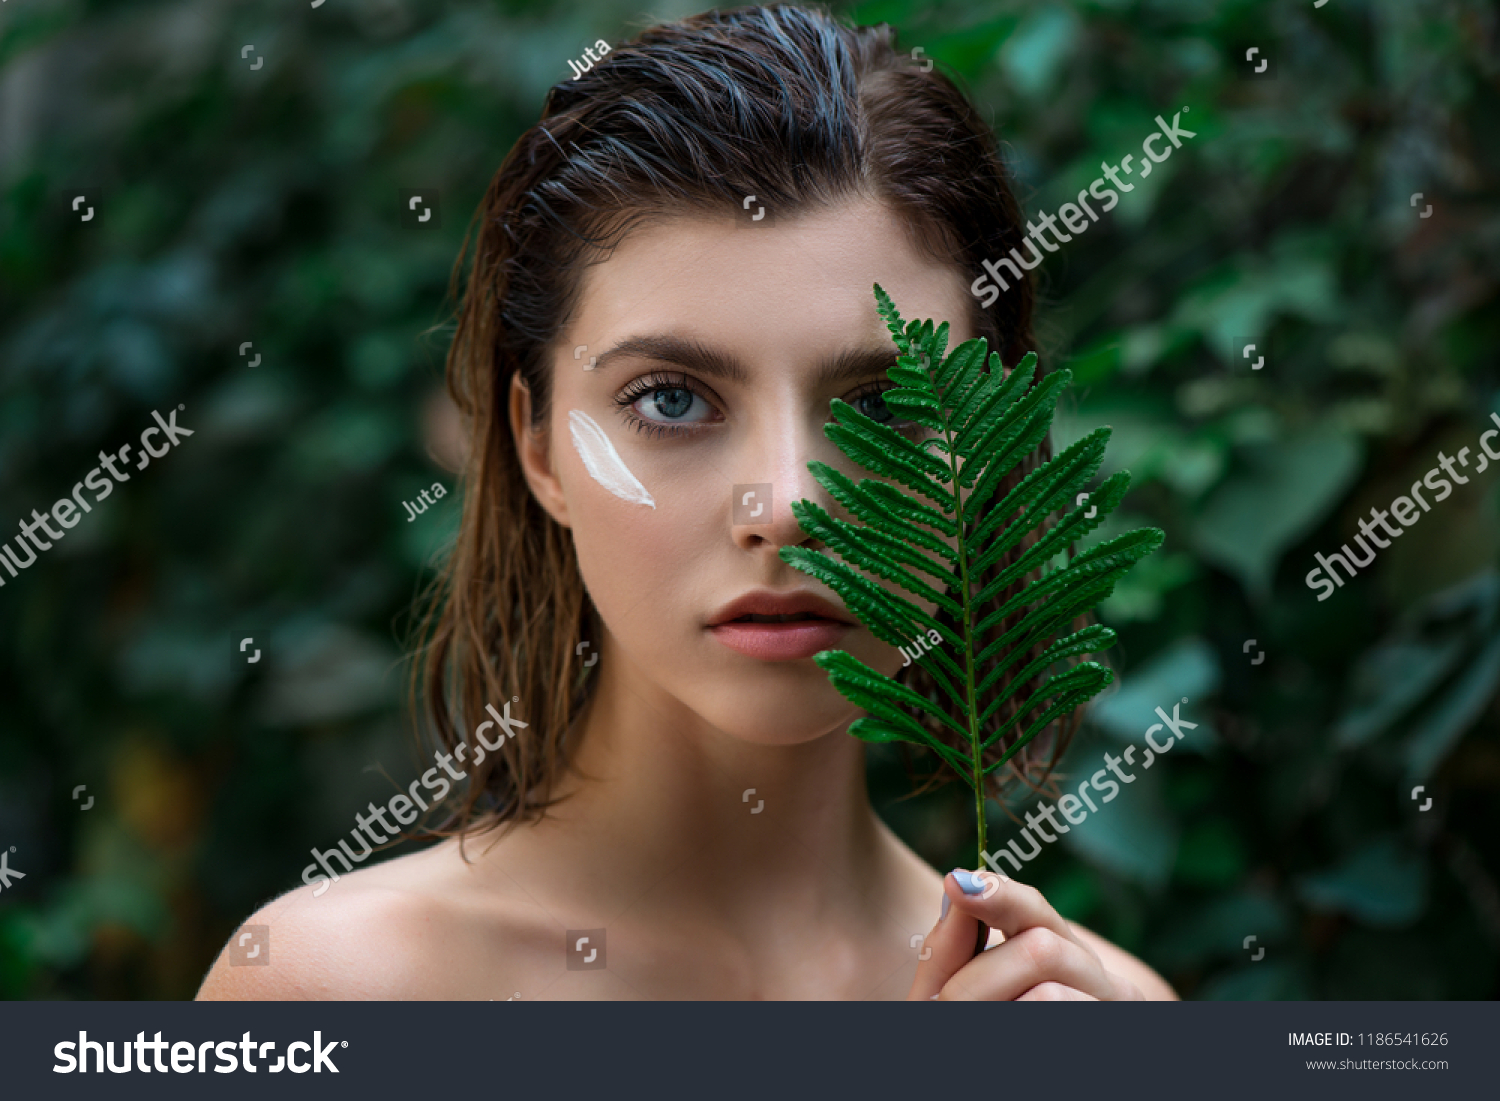 Beautiful young woman with perfect skin and natural make up posing front of plant tropical green leaves background with fern. Teen model with wet hair care of her face and body. SPA, wellness #1186541626